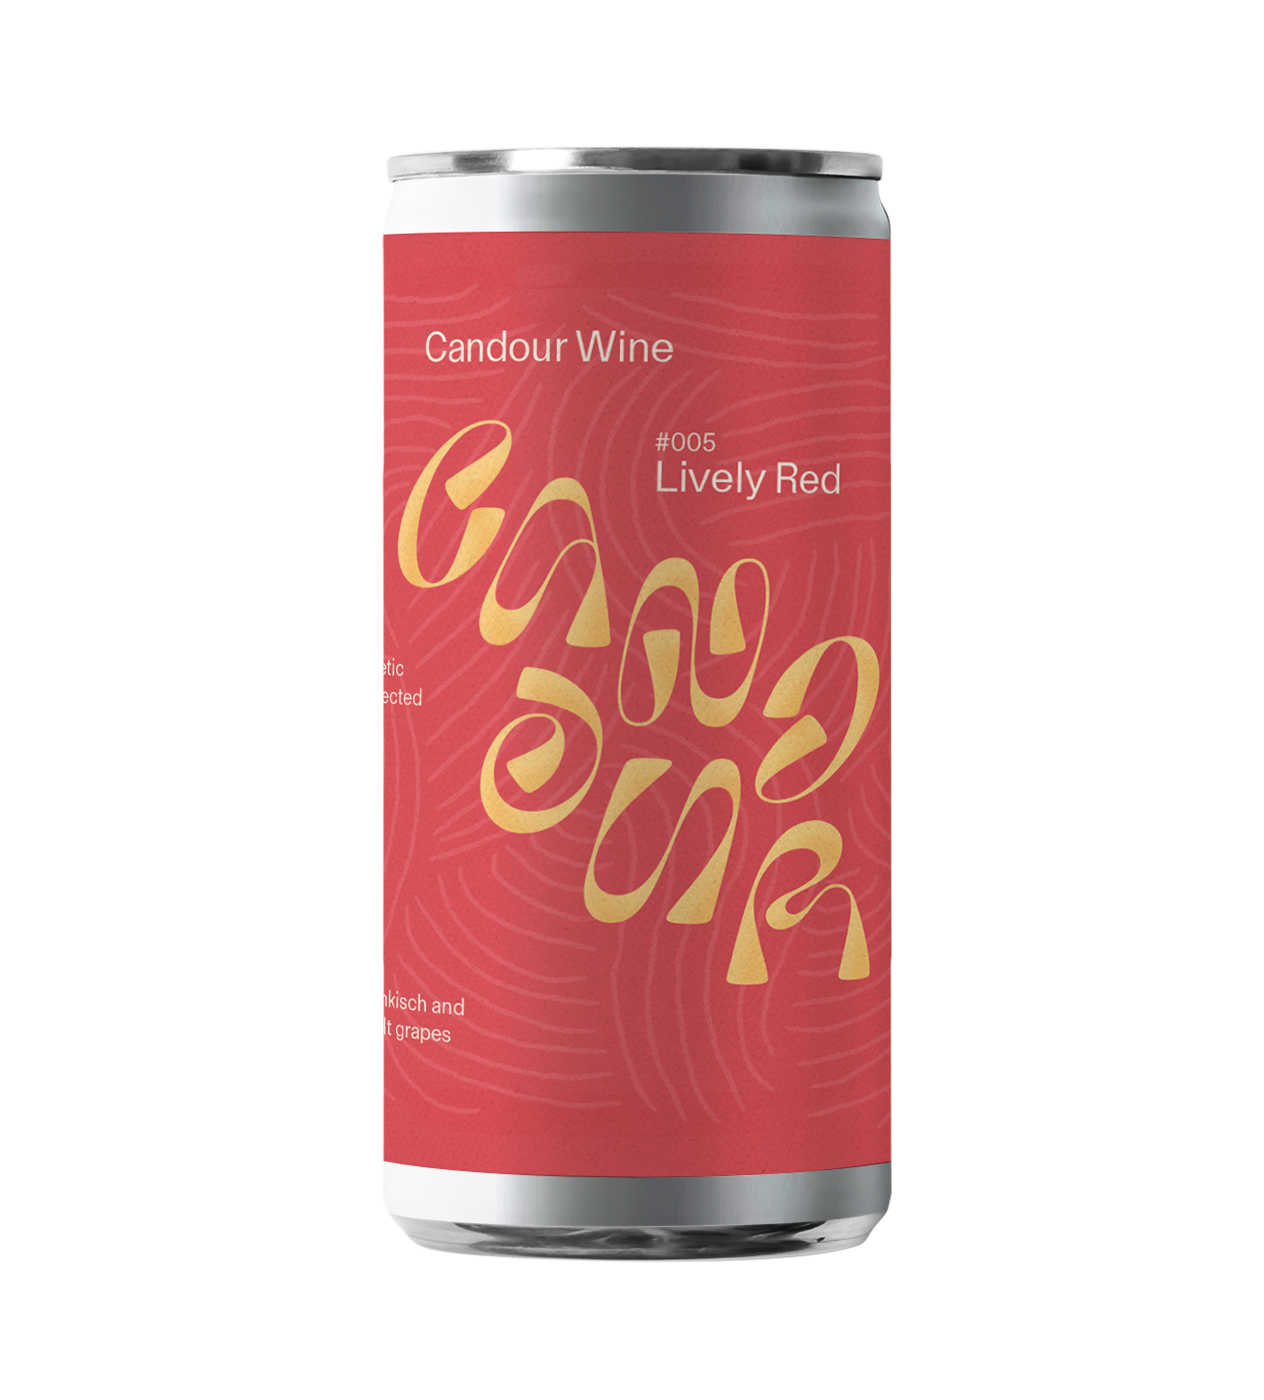 Candour Wine can of light red wine from Groszer Wein